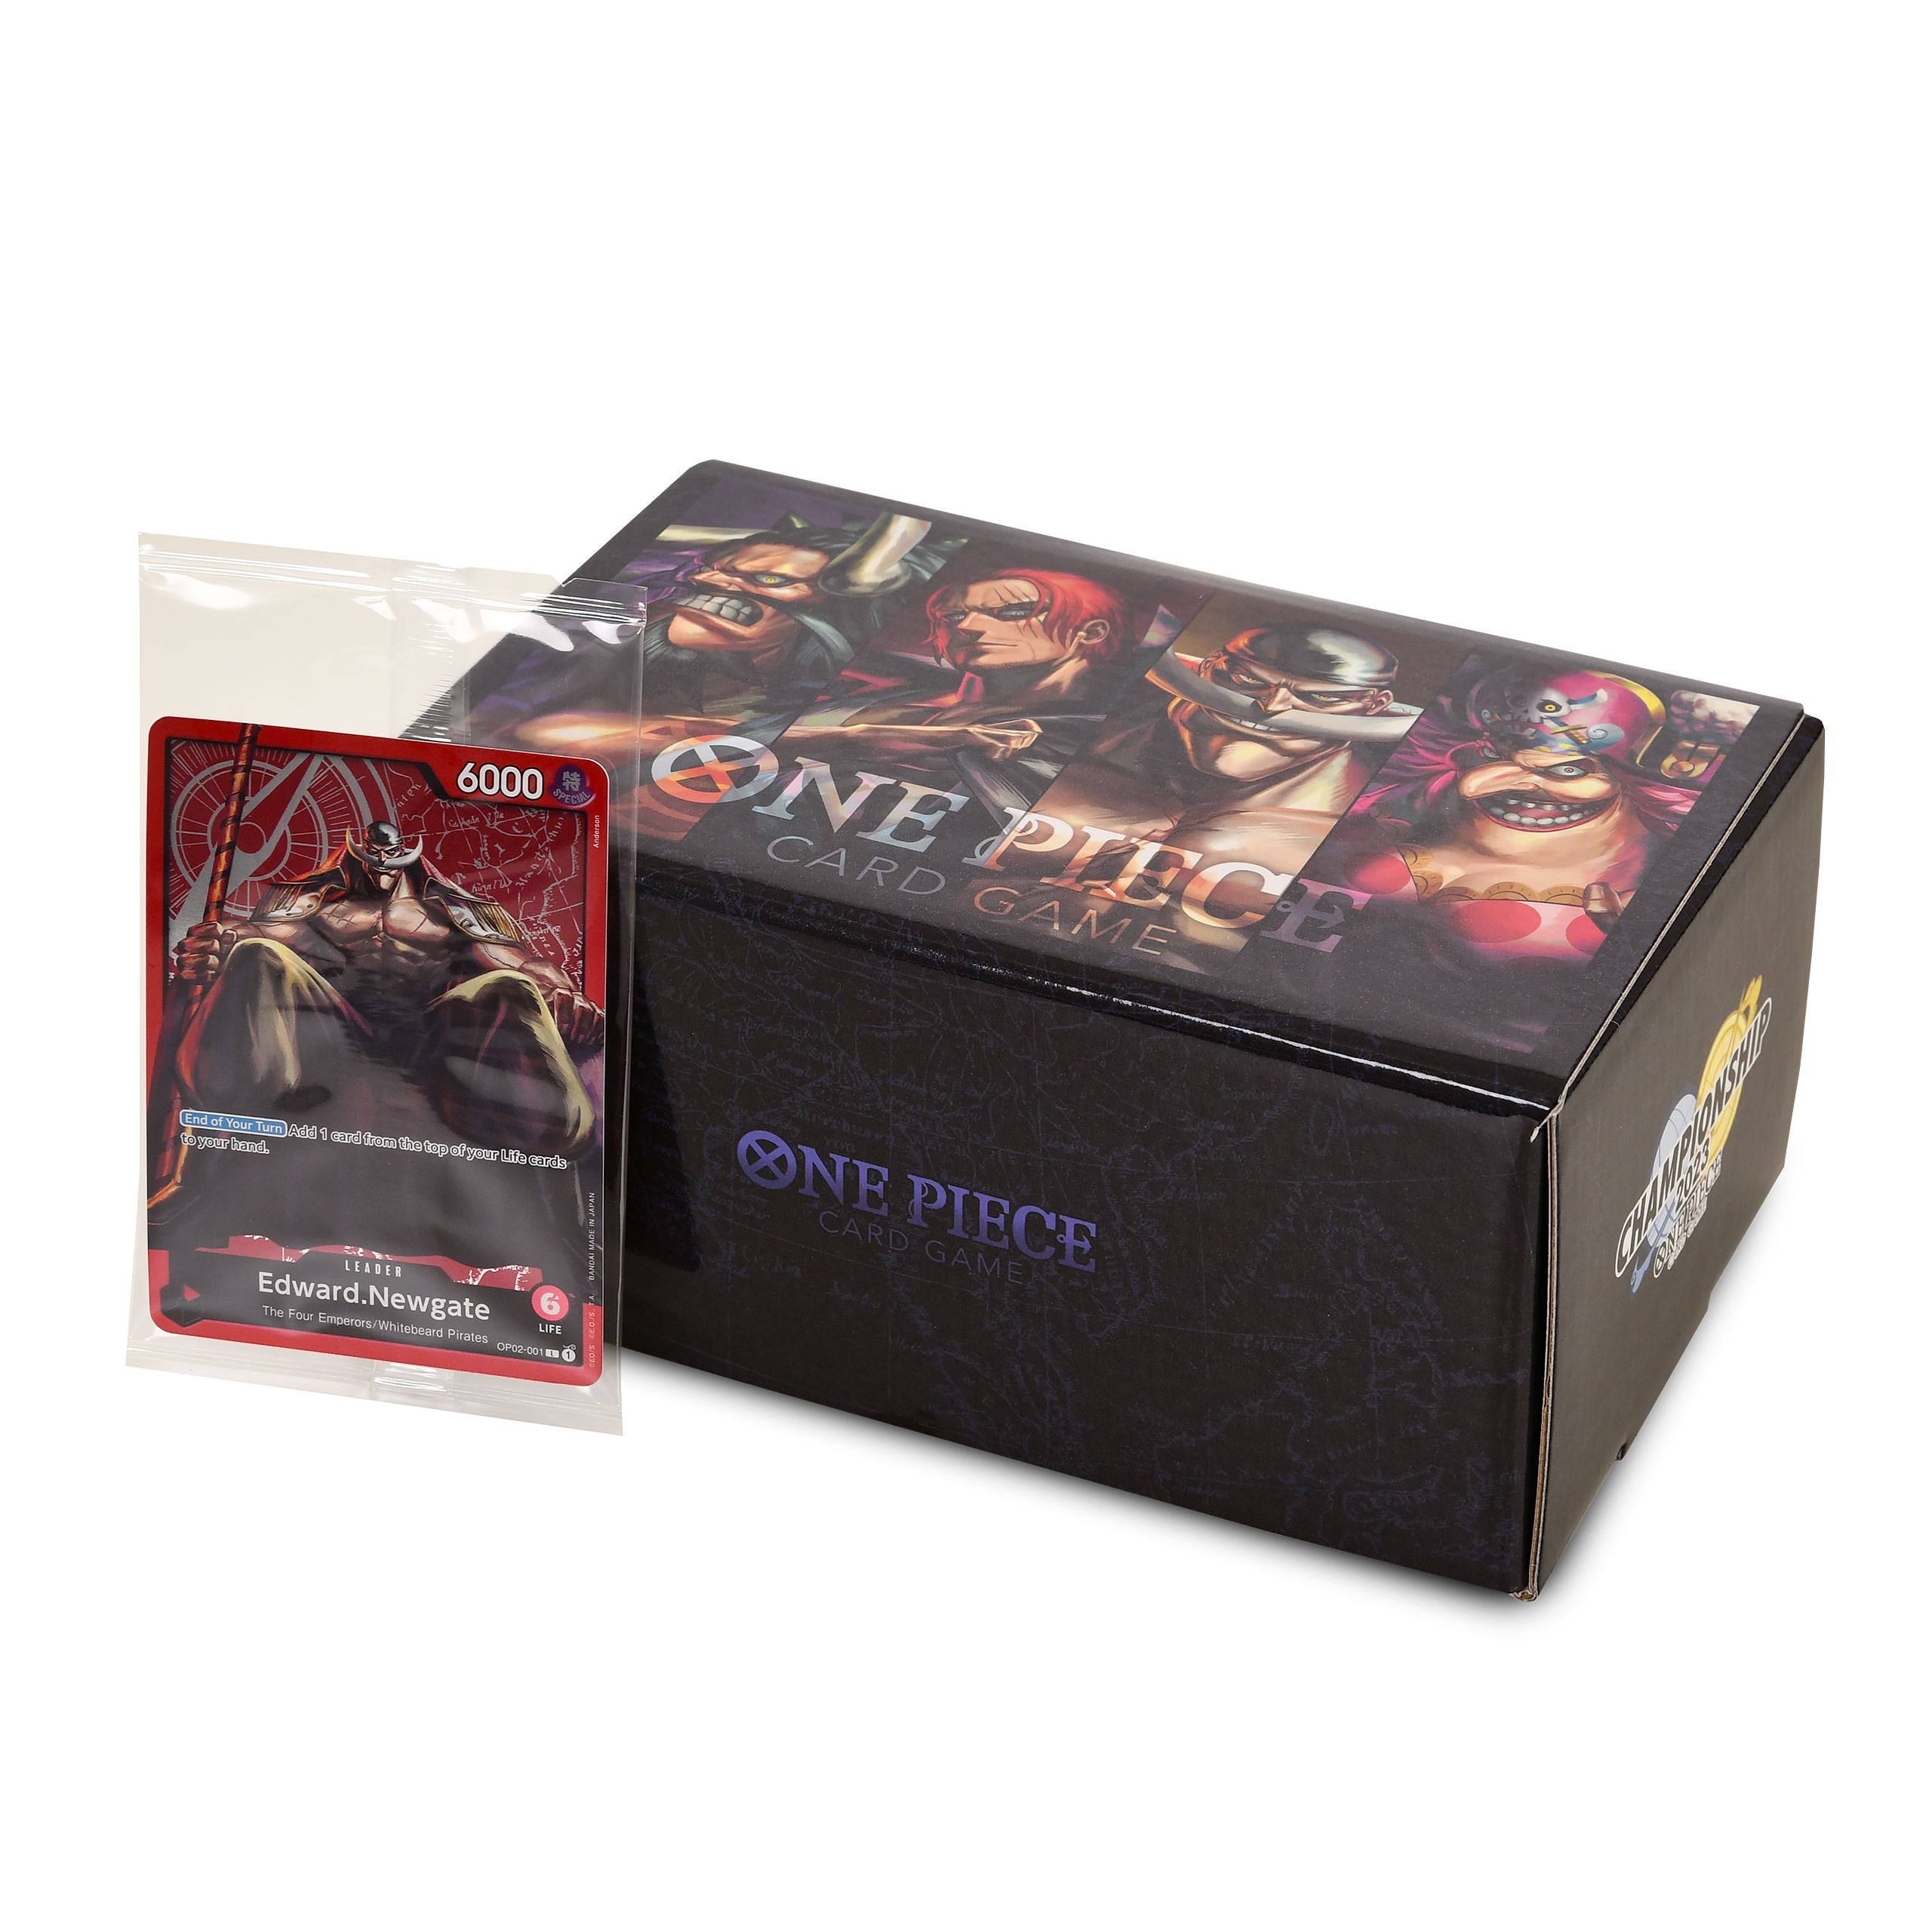 One Piece Card Game - Four Emperors Playmat and Storage Box